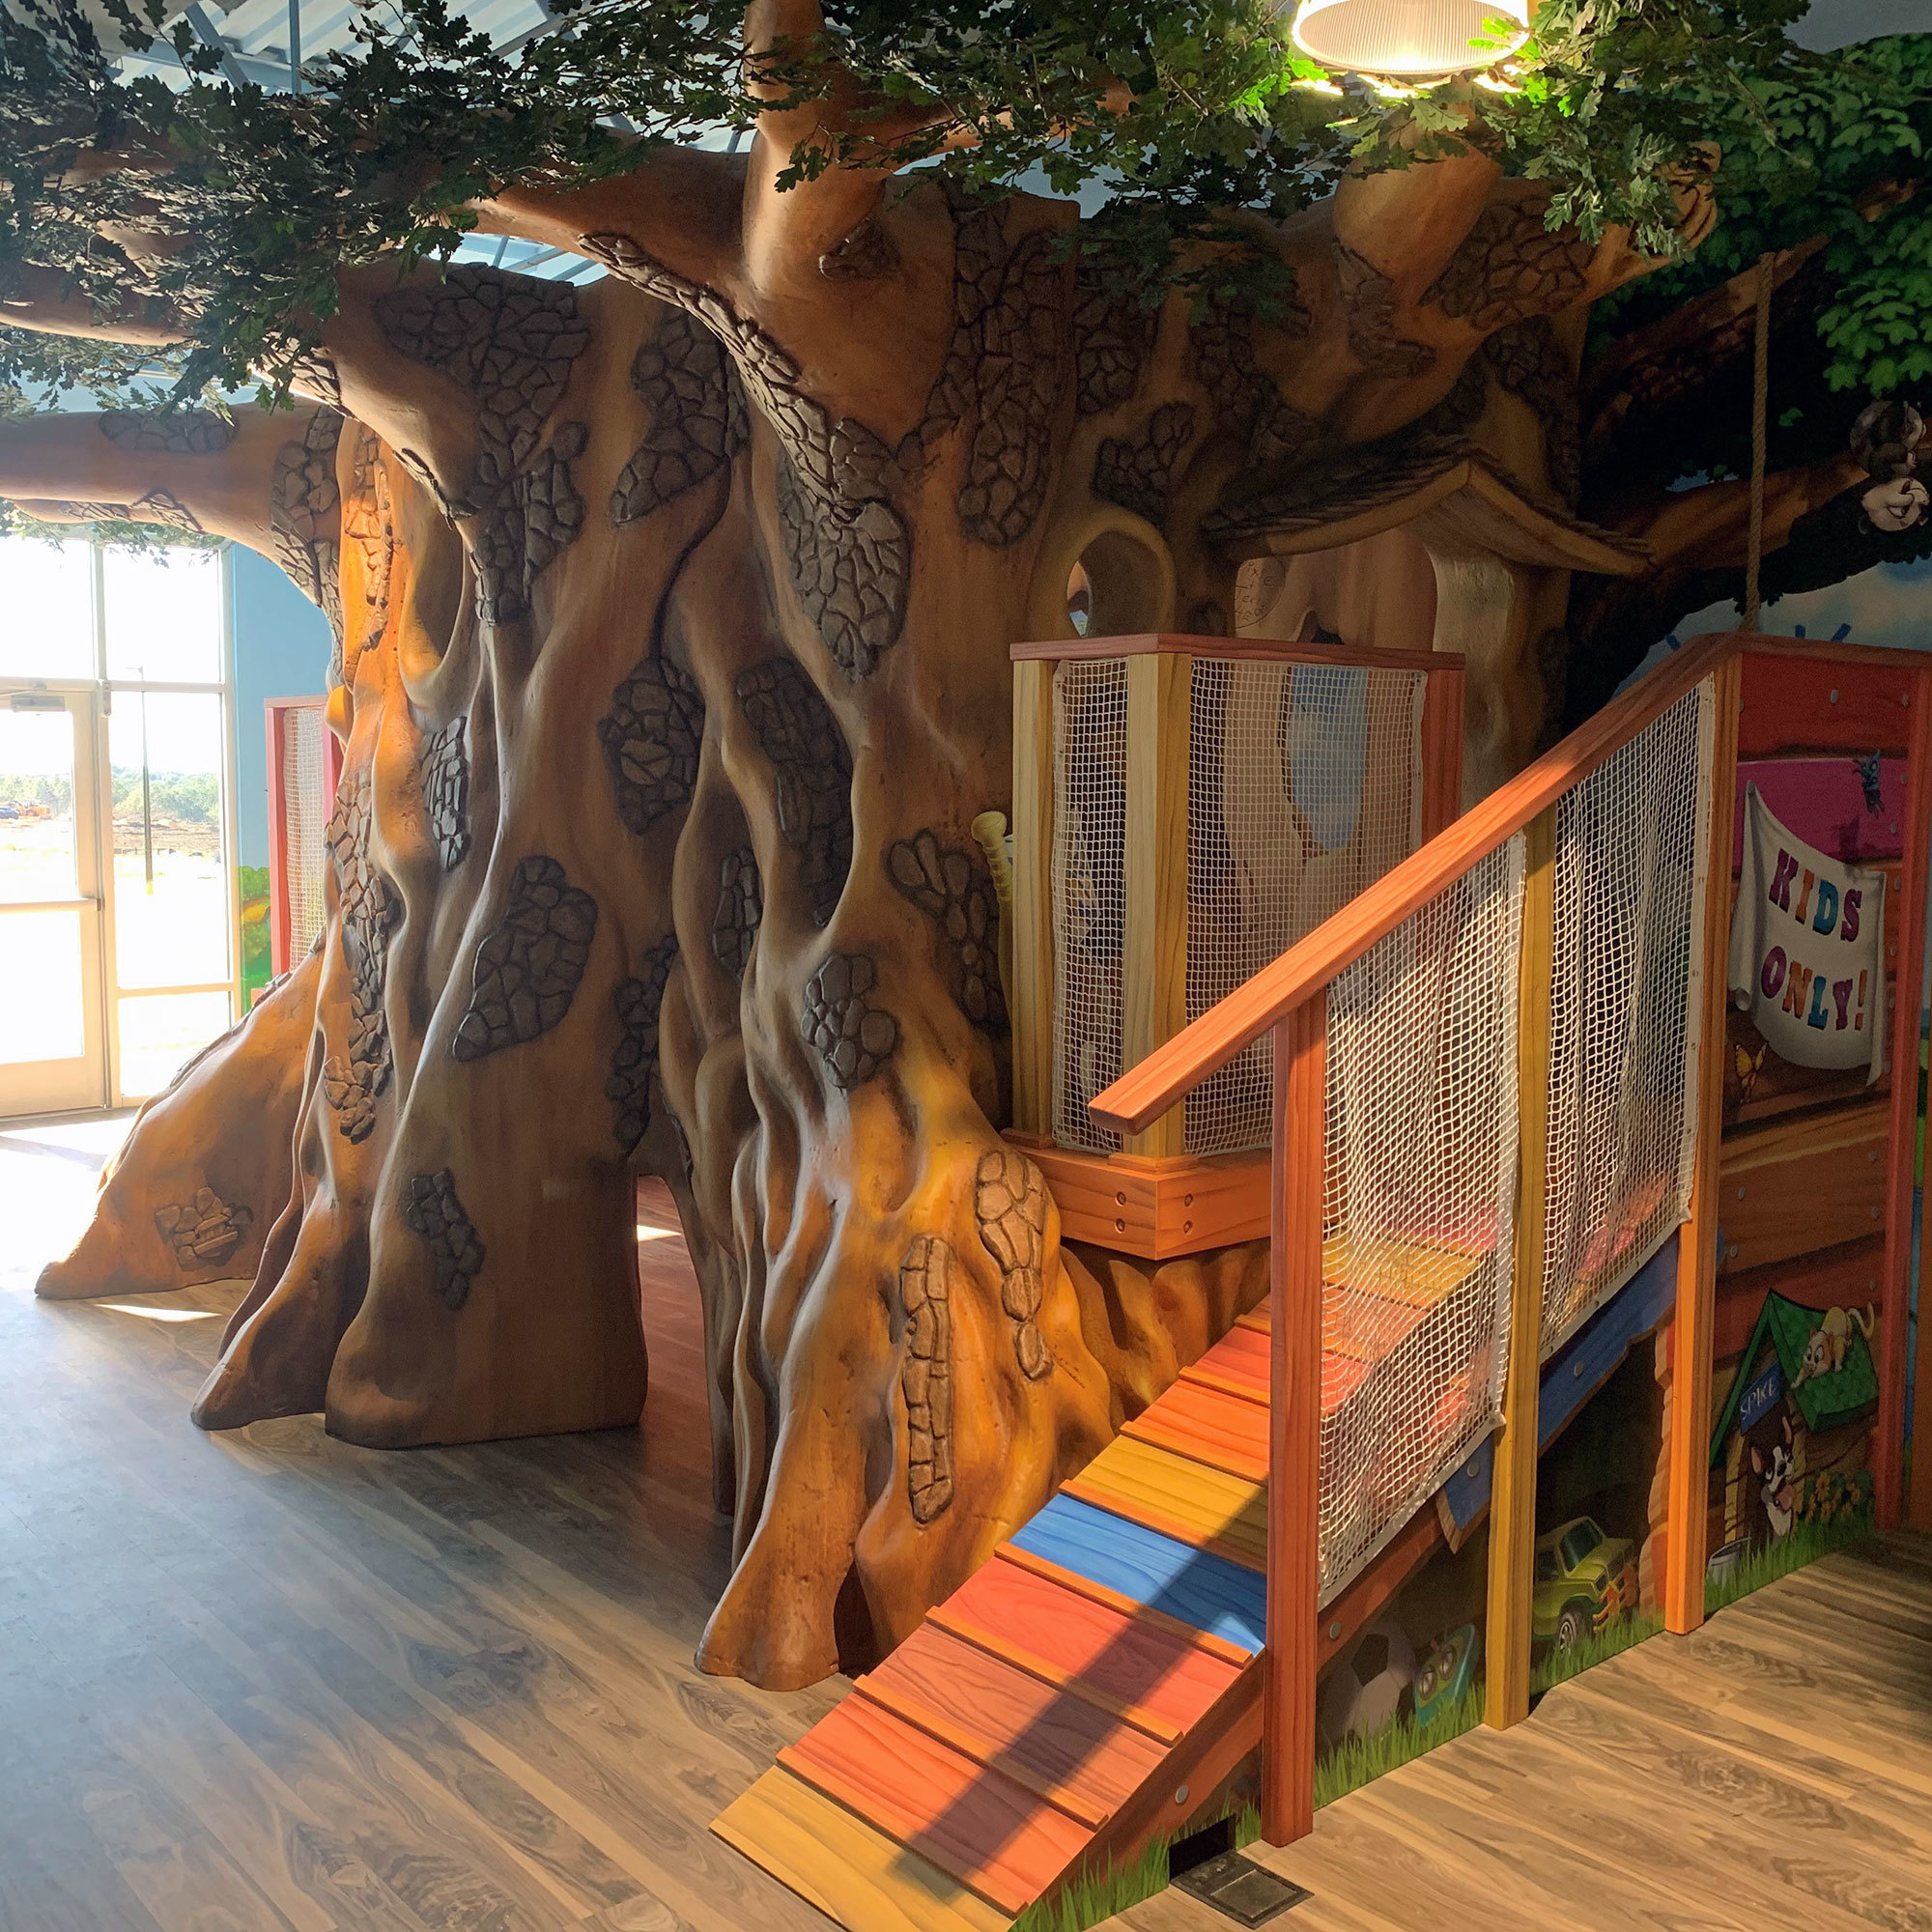 3D sculpted Interactive Treehouse Play Area with colorful ramp, netting and cozy spots at a Church